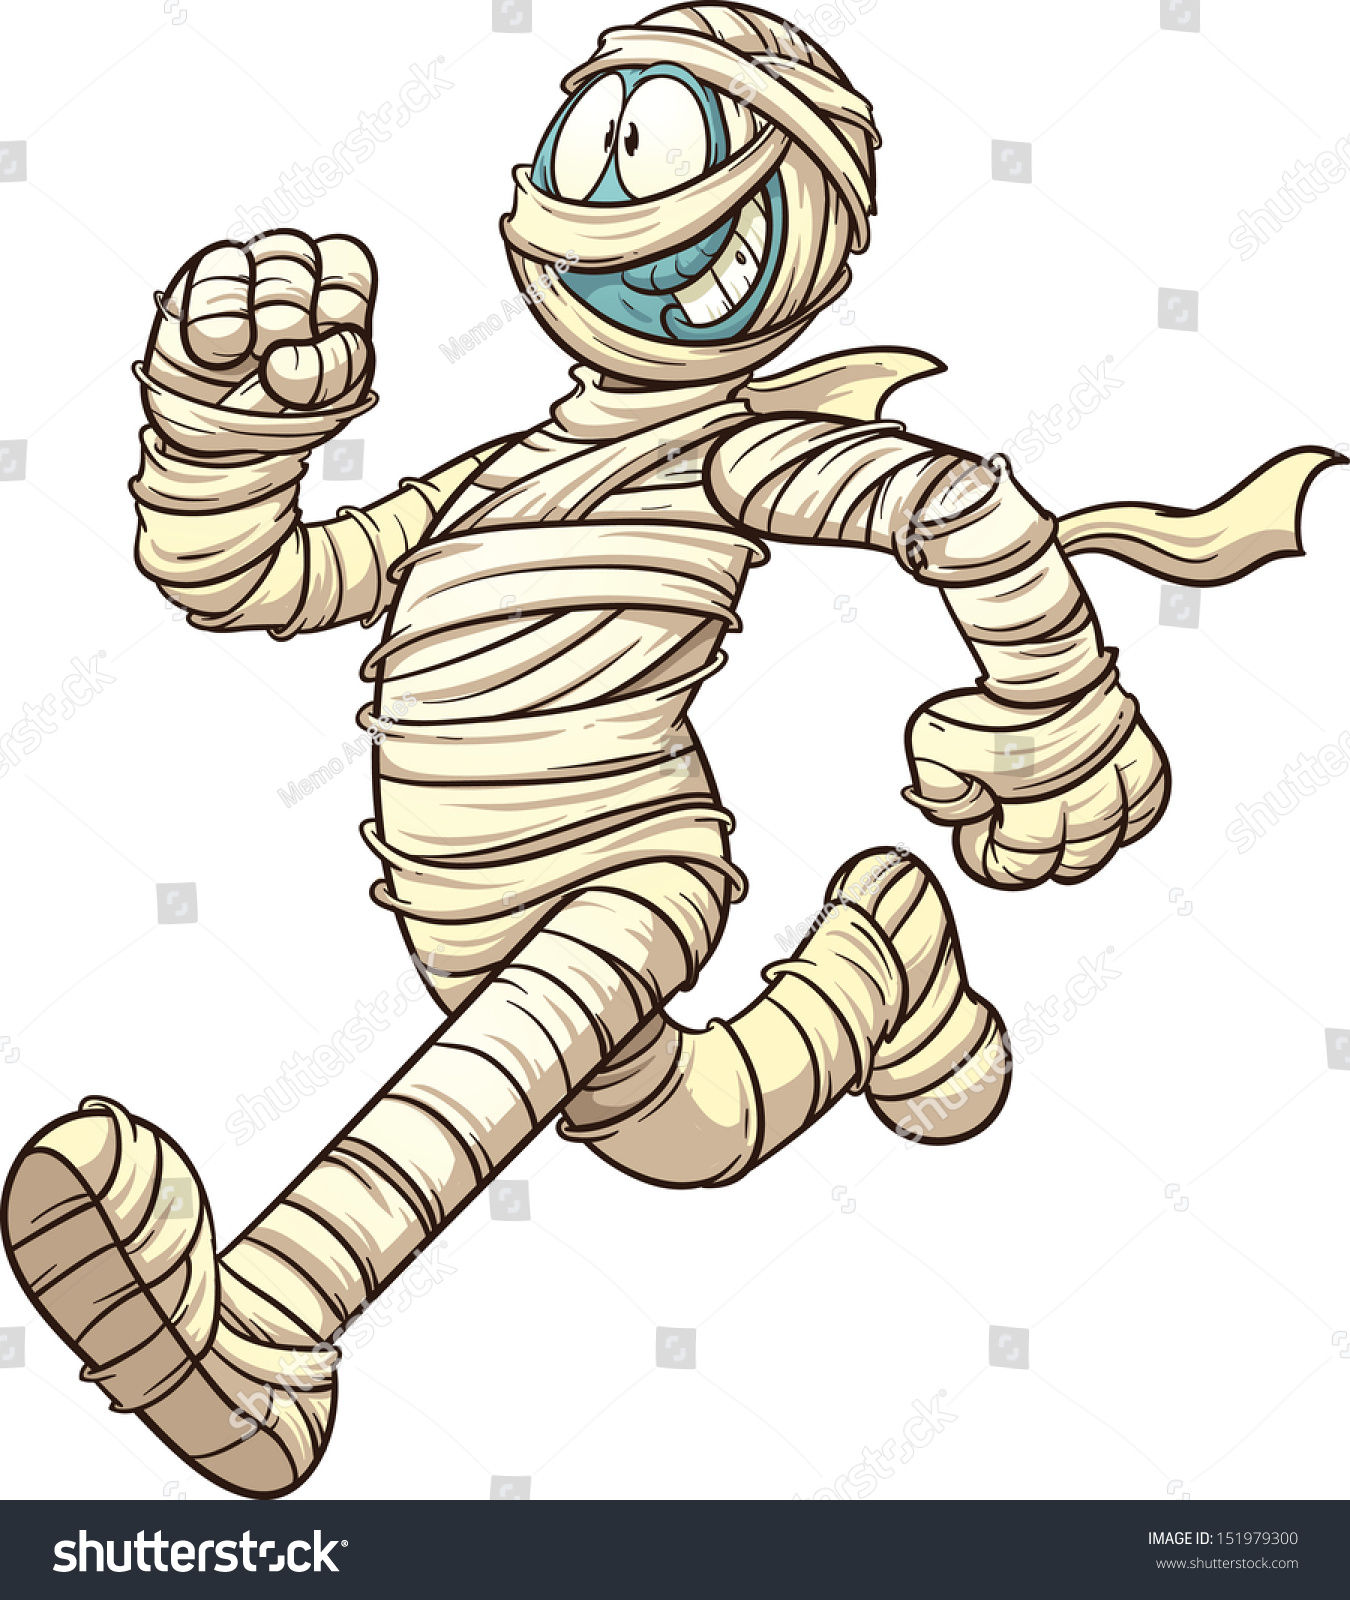 stock-vector-cartoon-running-mummy-vector-clip-art-illustration-with-simple-gradients-all-in-a-single-layer-151979300.jpg